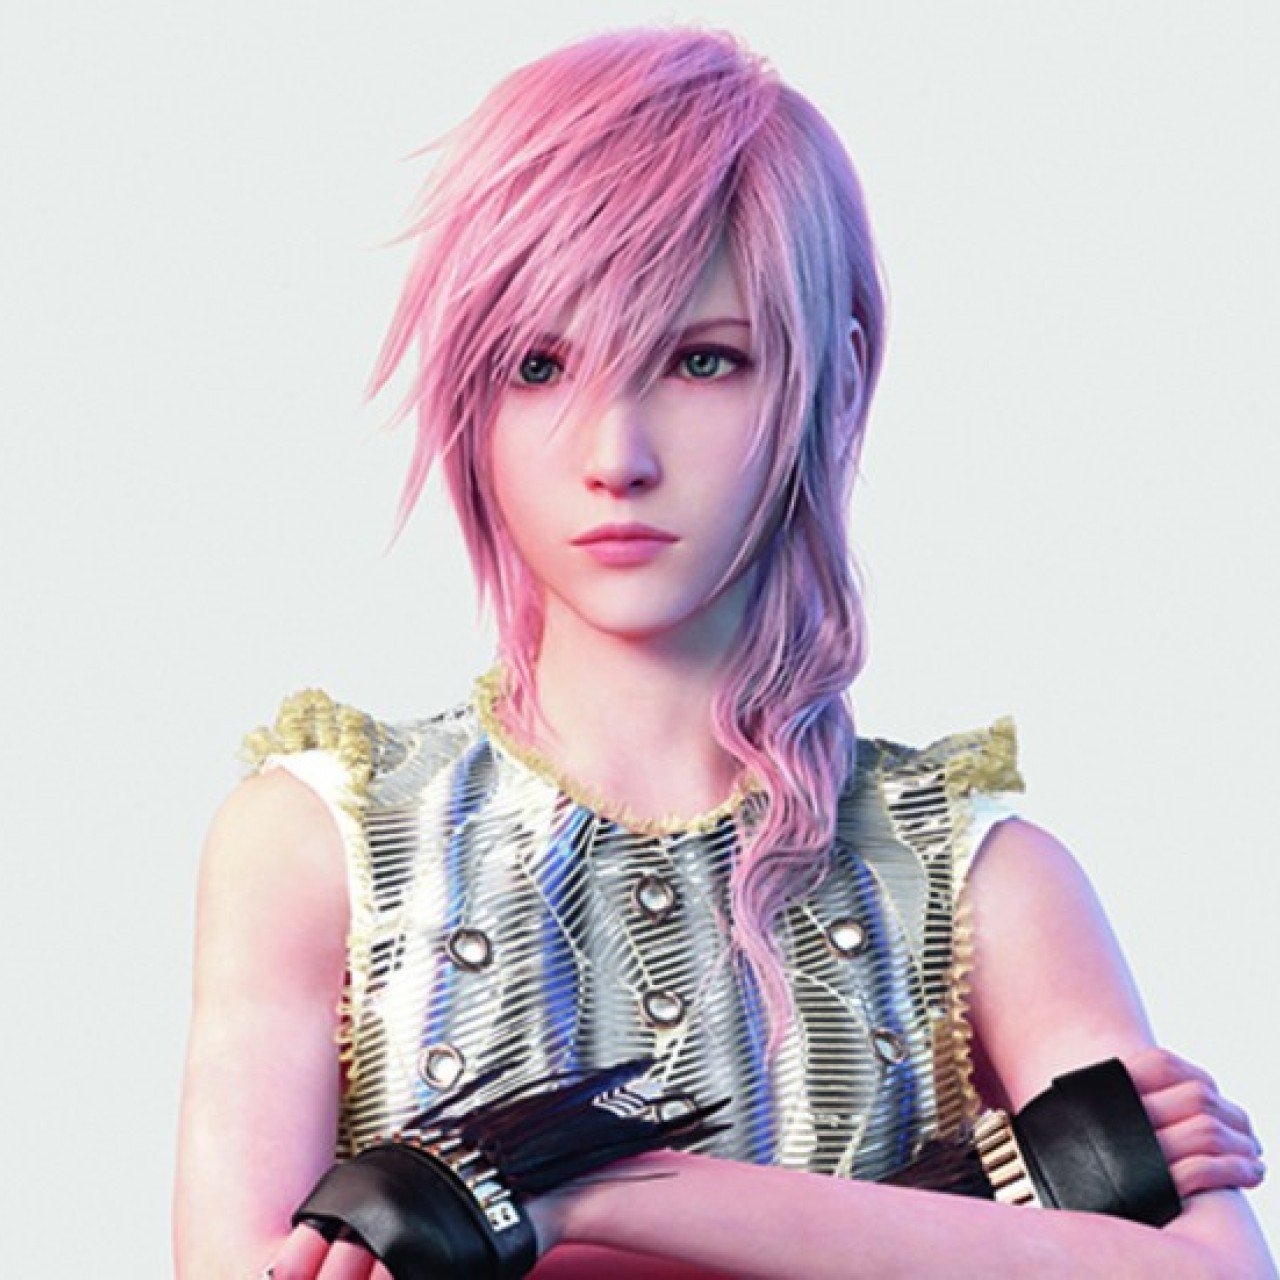 LIGHTNING BECOMES A FASHION ICON IN LOUIS VUITTON'S “SERIES 4